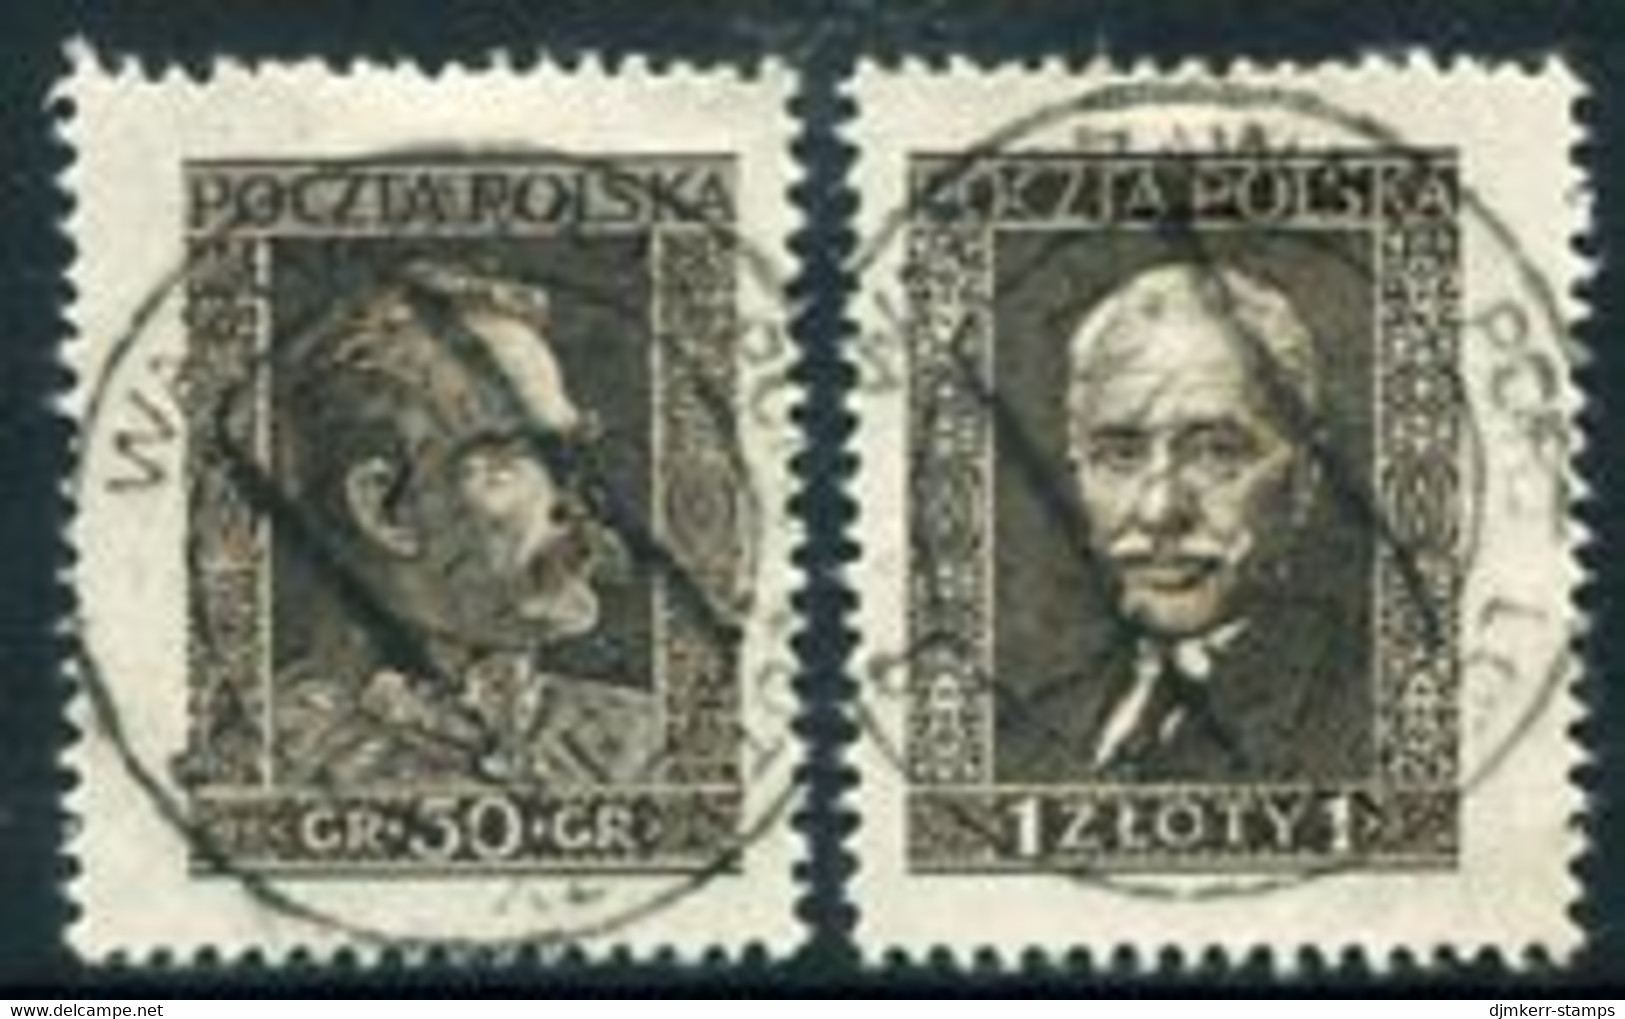 POLAND 1928 Warsaw Philatelic Exhibition Singles Ex Block, Used.  Michel 254-55 - Used Stamps